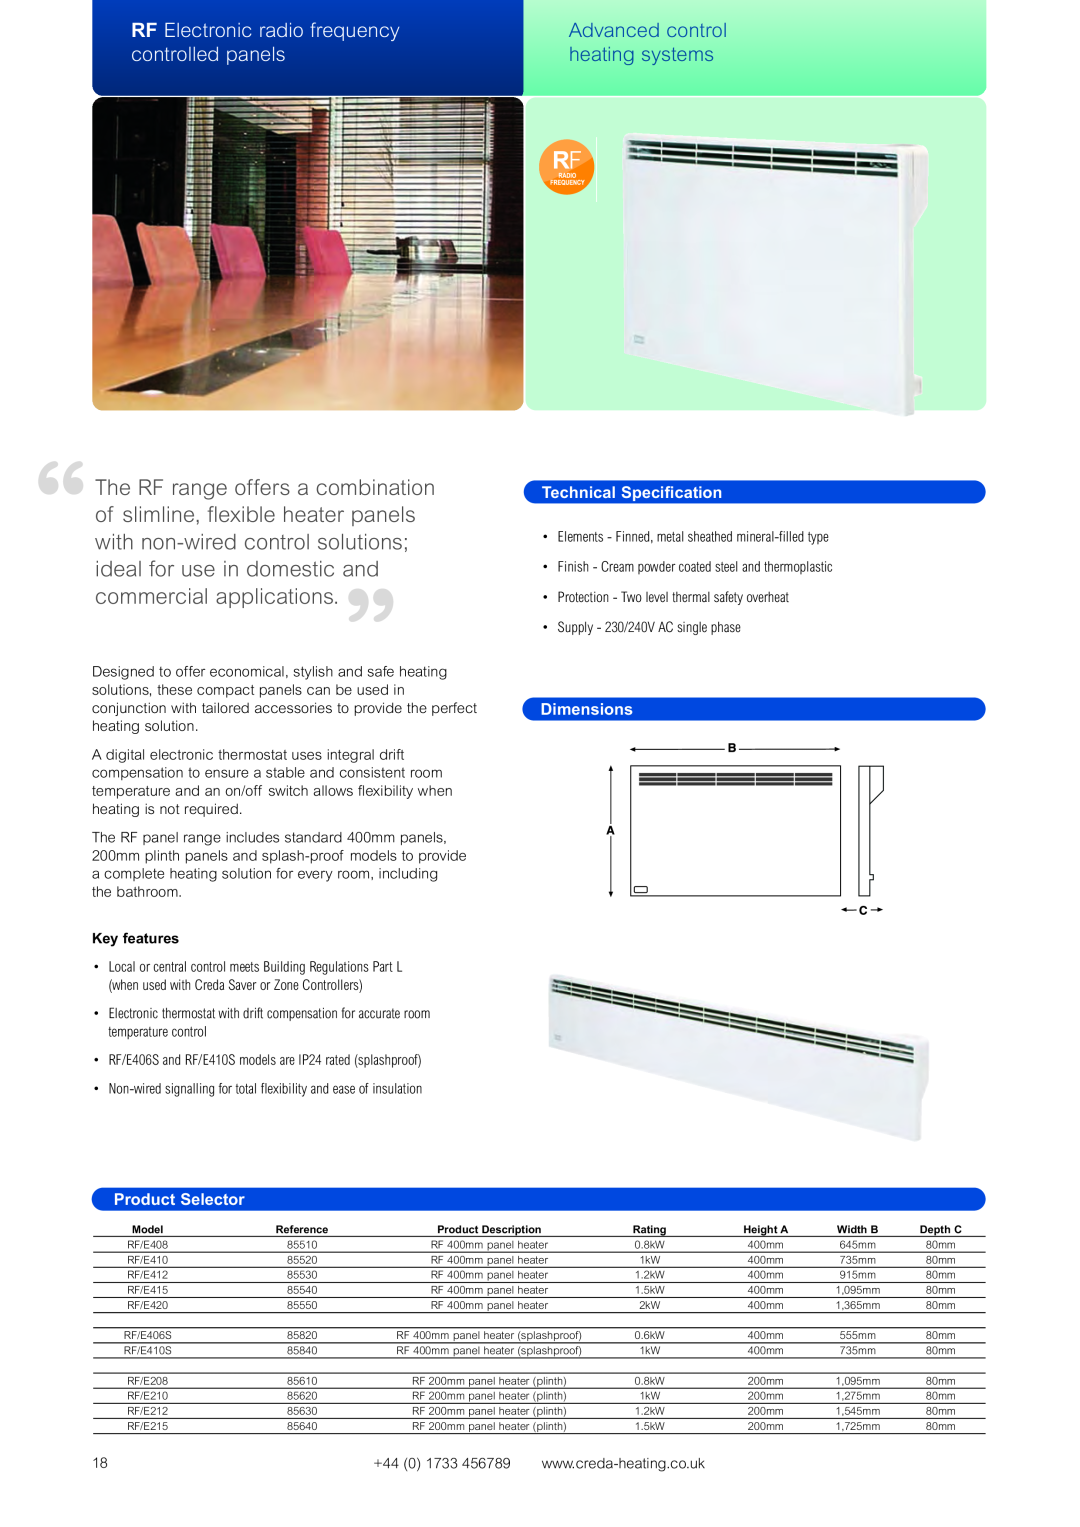 Creda Advanced Control Heating Systems RF Electronic radio frequency, controlled panels, Advanced control, heating systems 